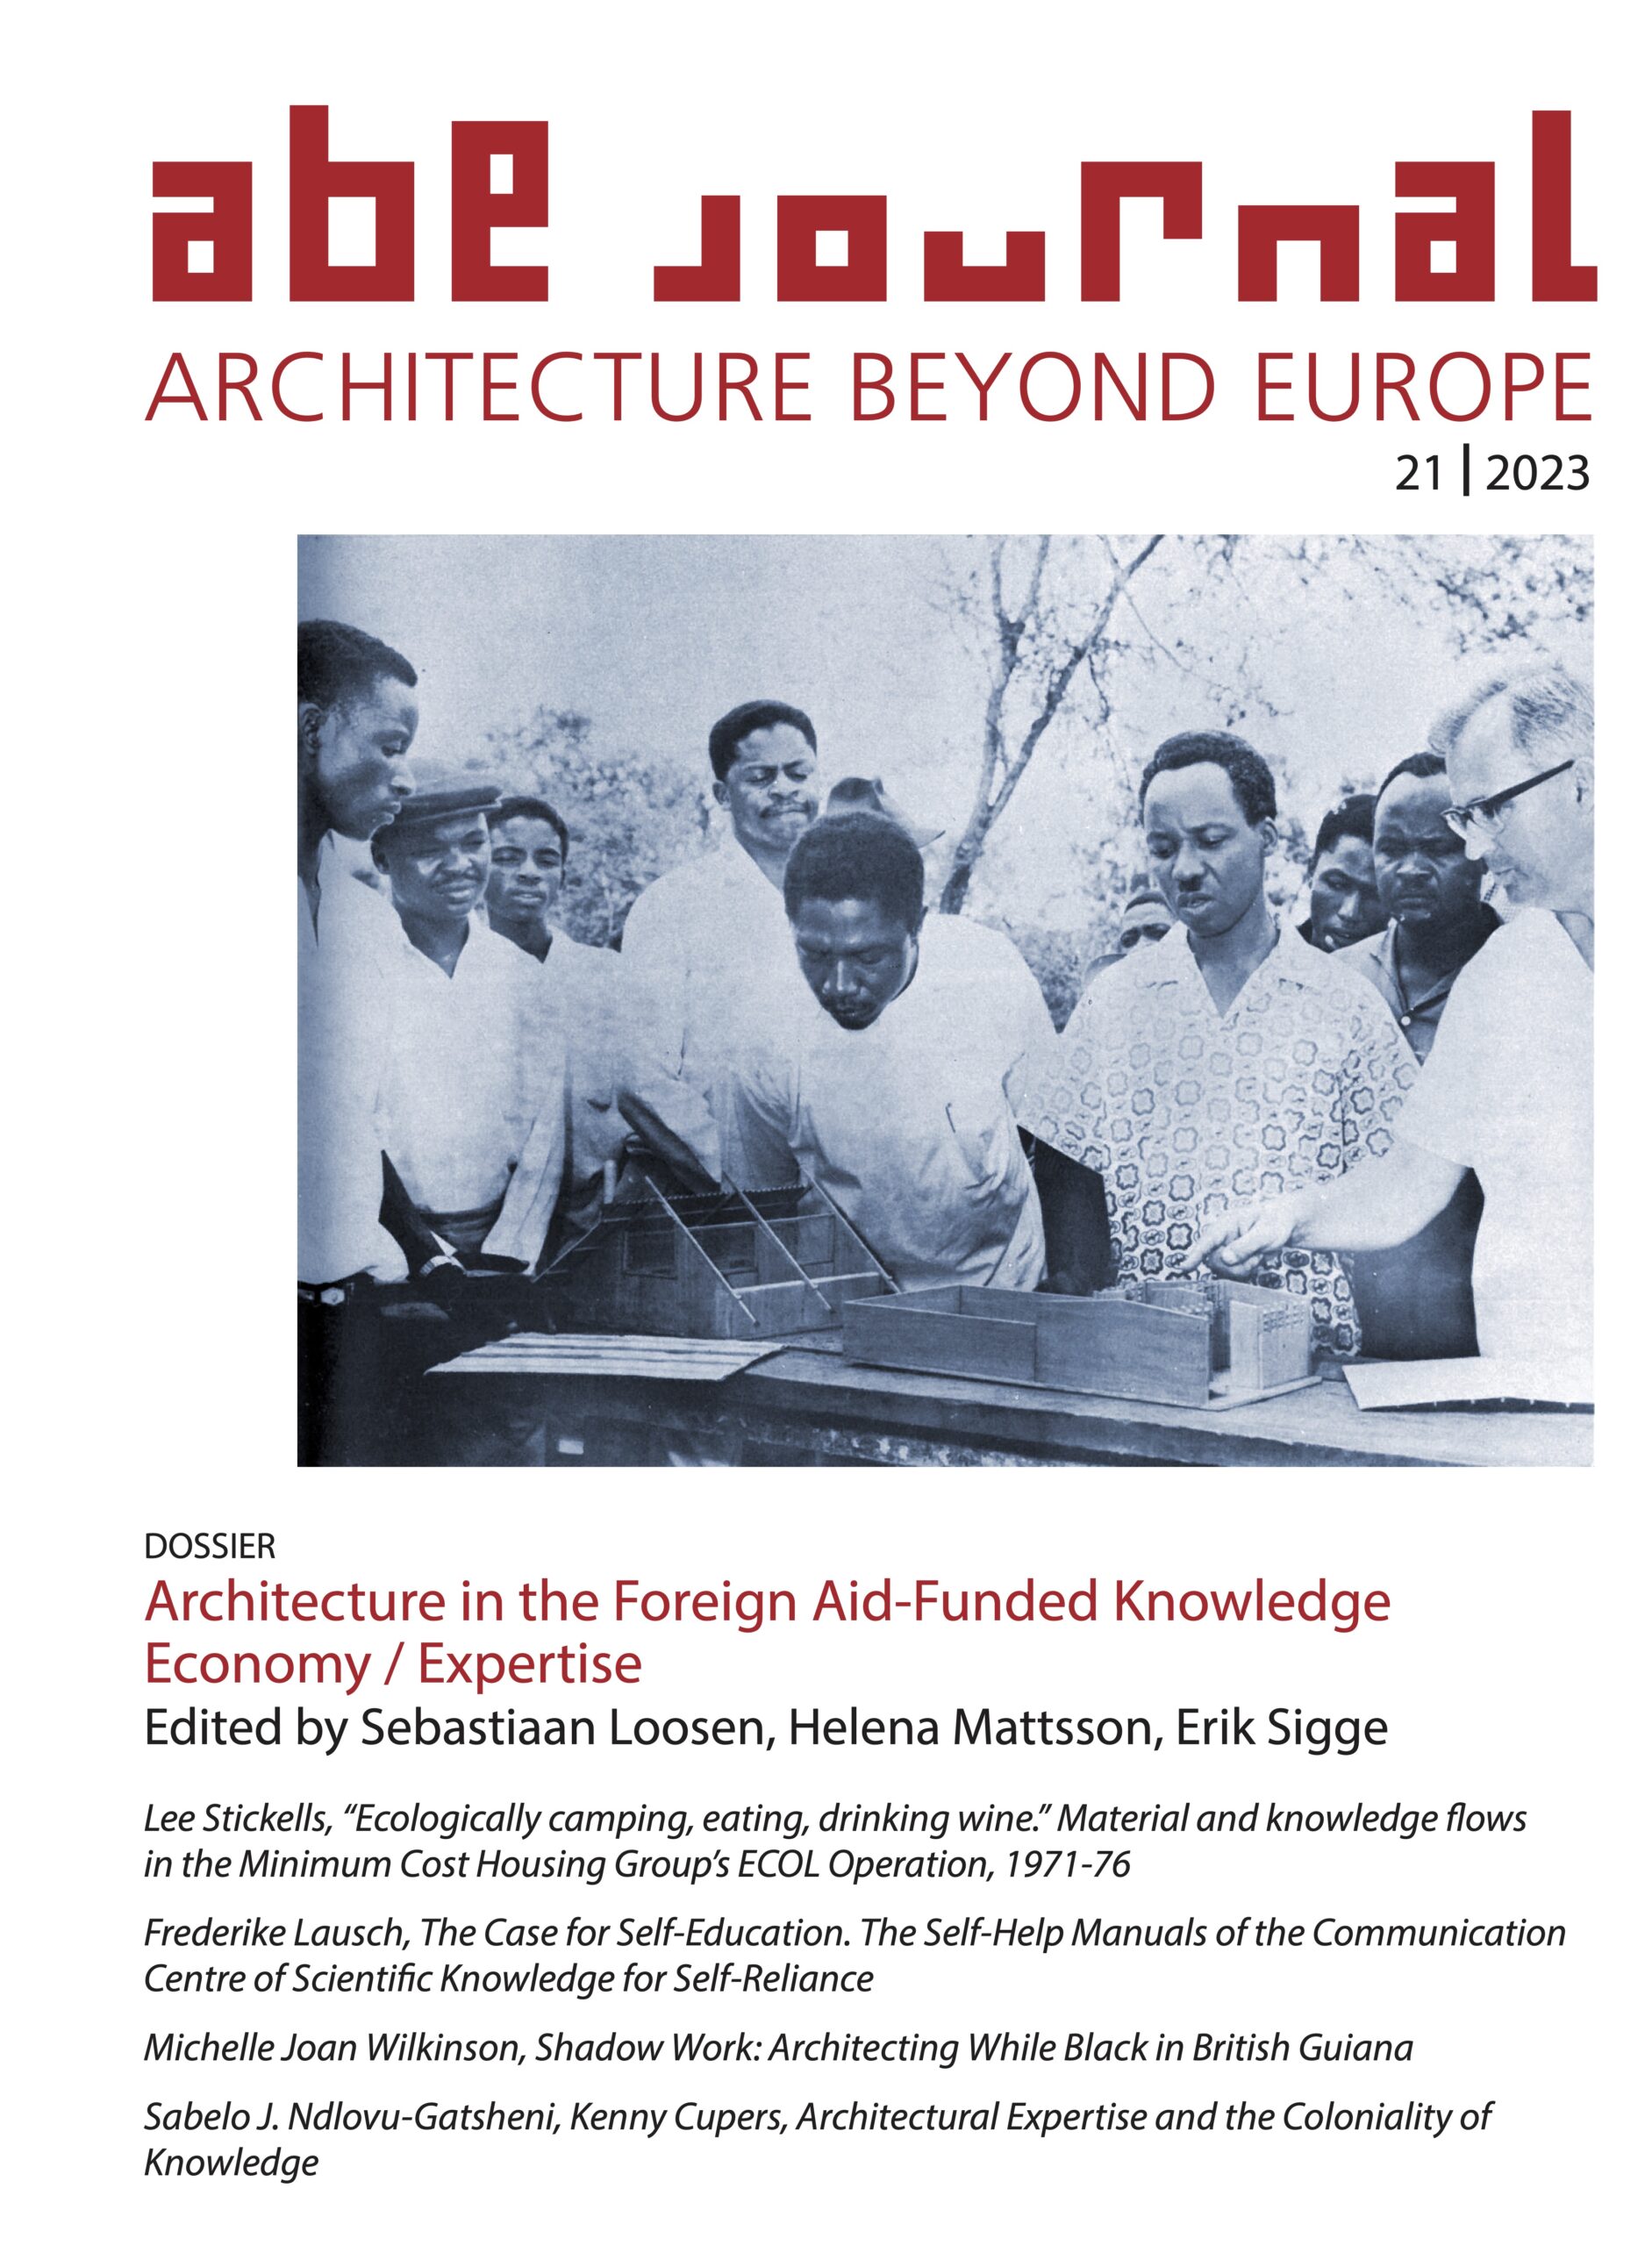 ABE Journal 21+22 | 2023 - Architecture in the Foreign Aid-Funded Knowledge Economy.